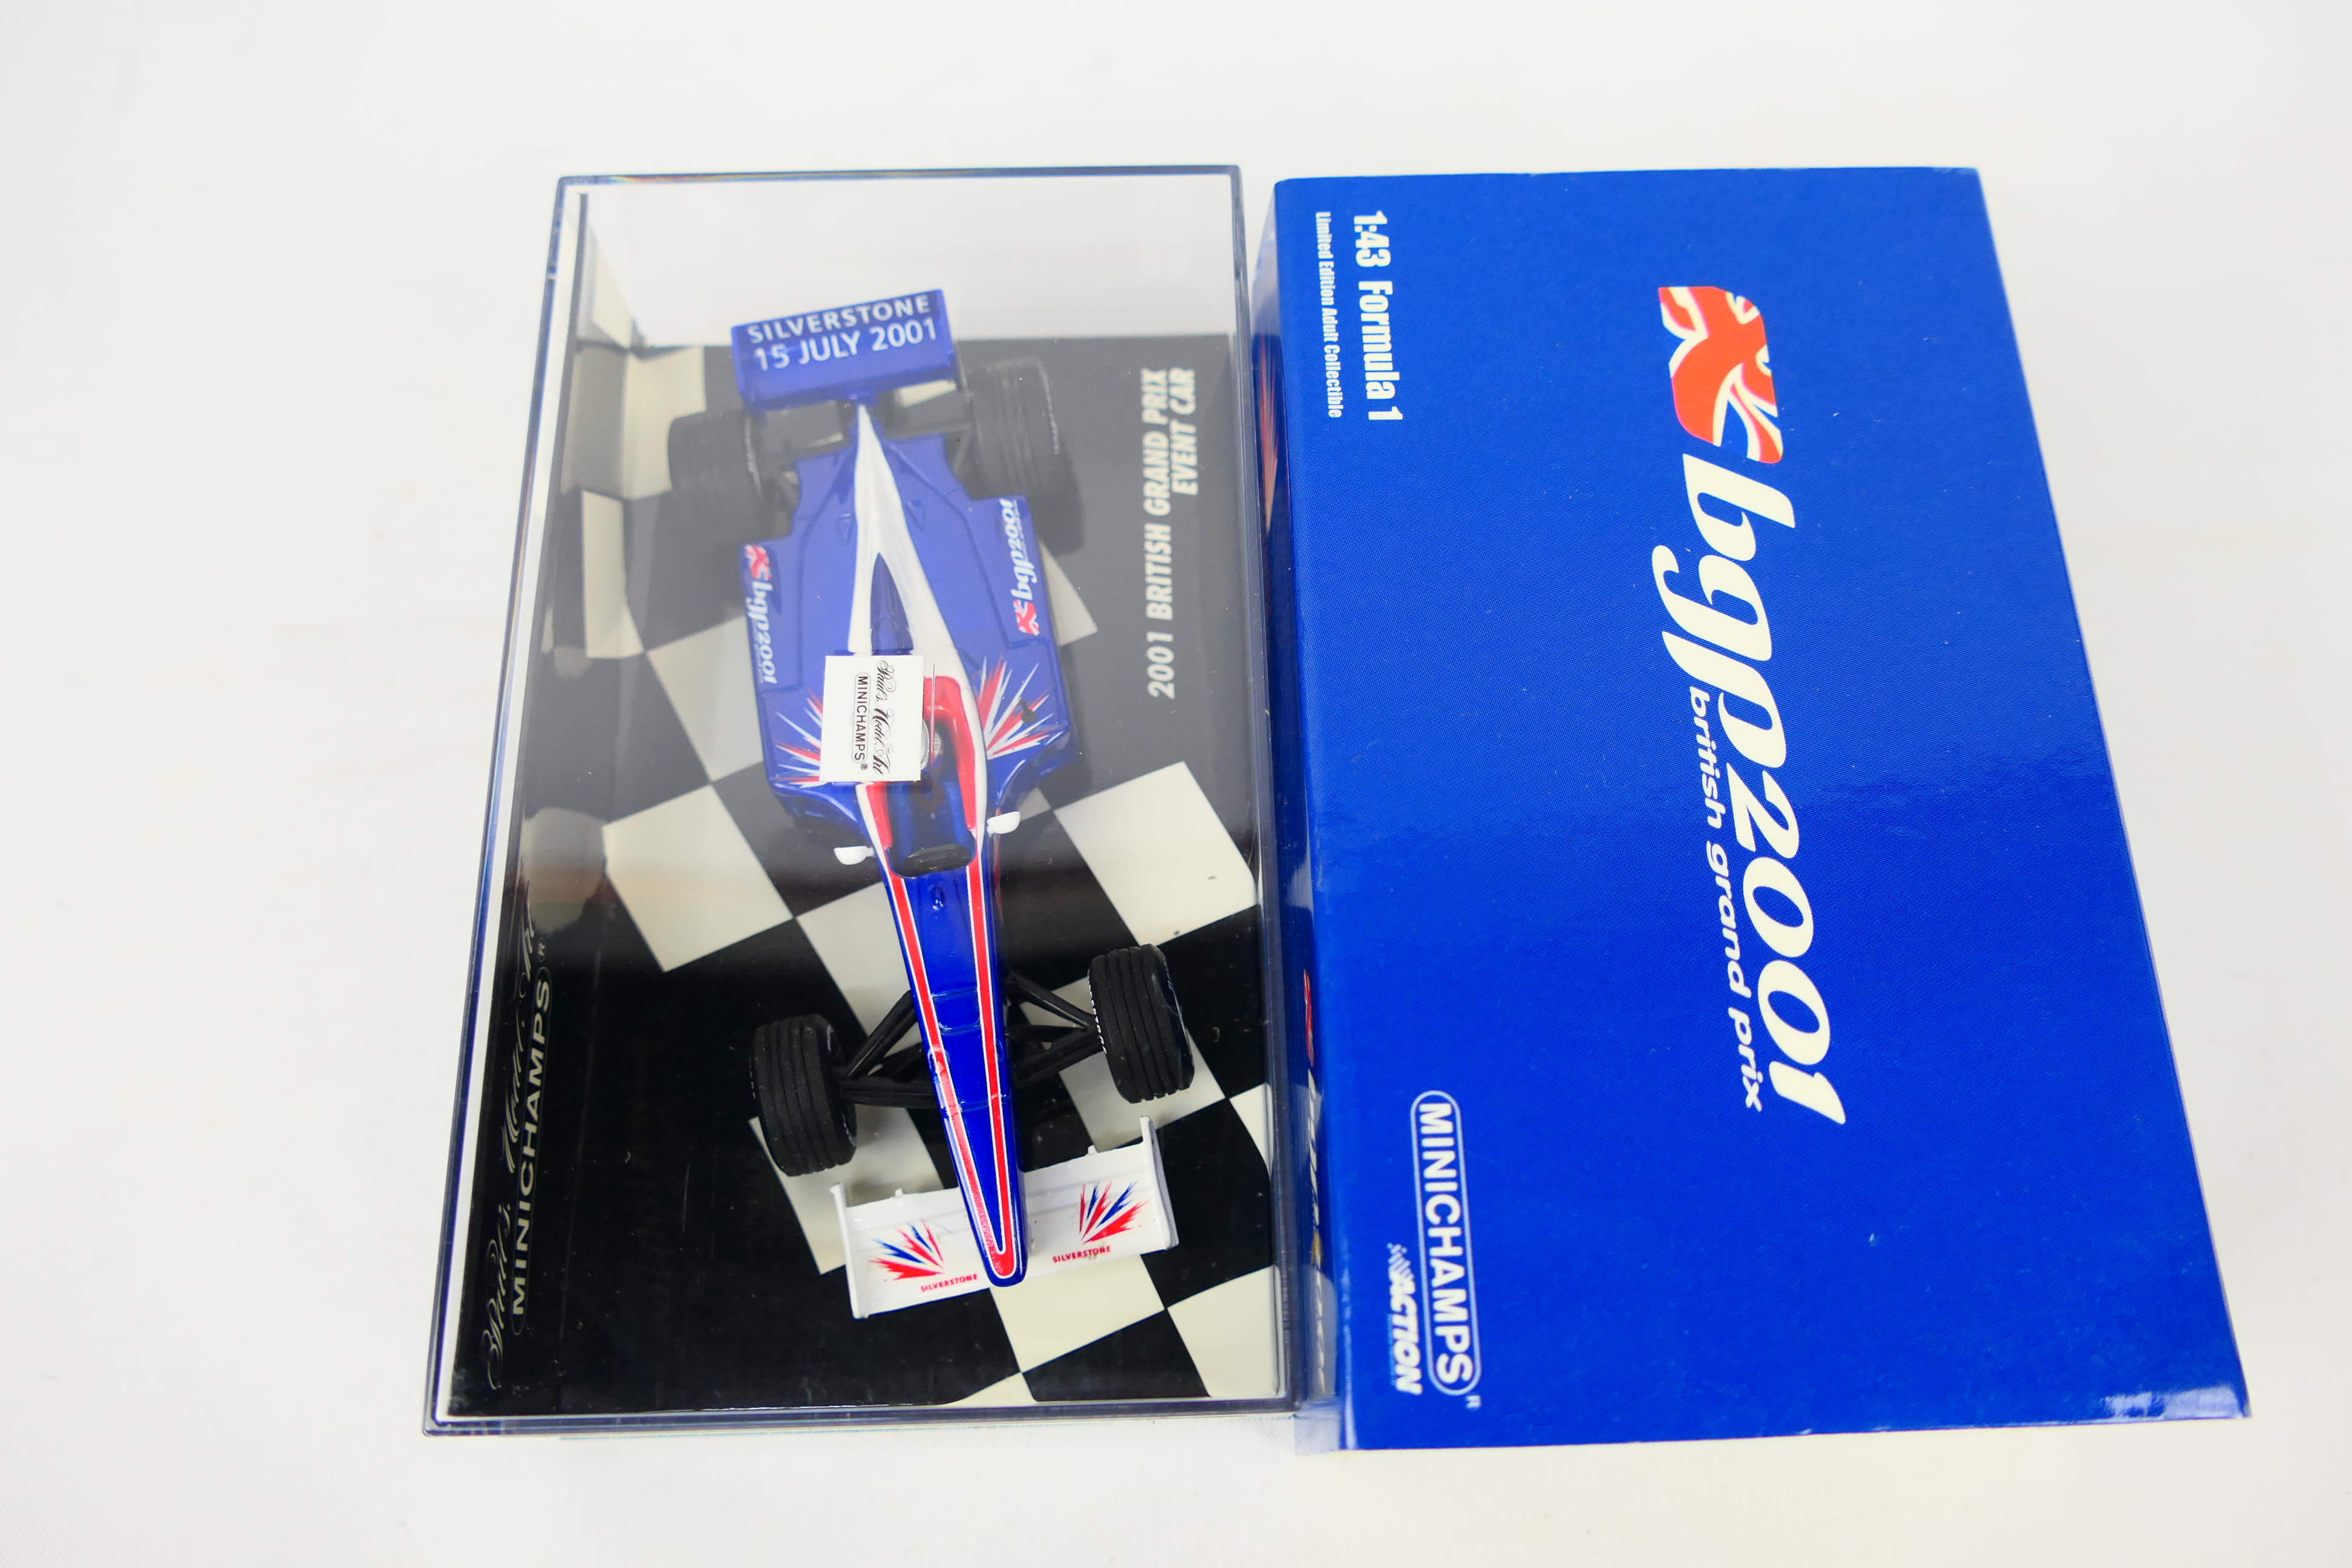 Minichamps - Seven boxed 1:43 scale diecast F1 racing cars from Minichamps. - Image 4 of 8